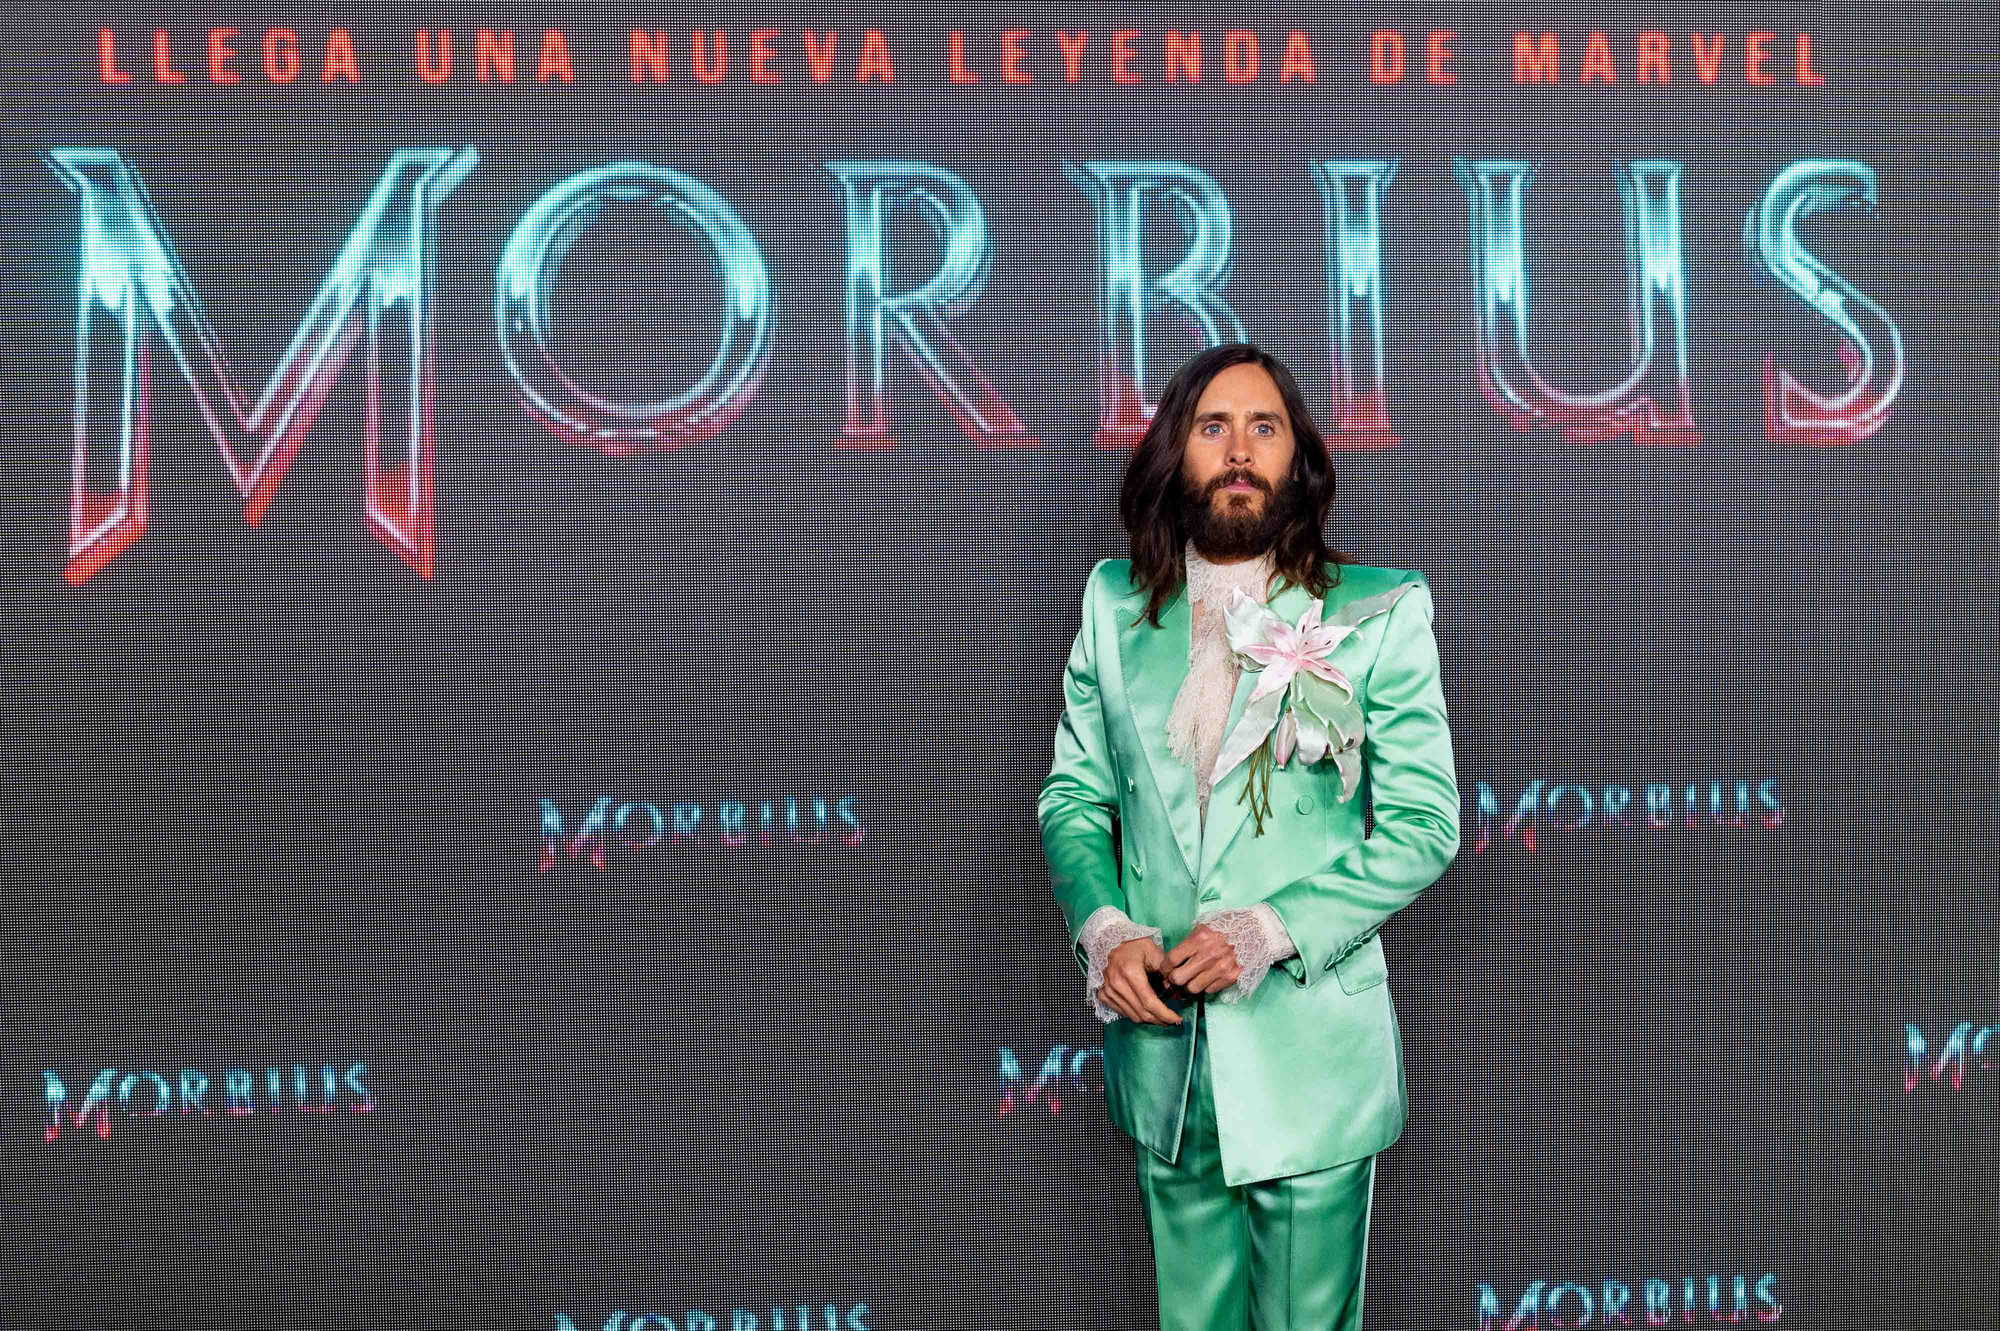 Jared Leto poses at the Madrid promotional showing of Morbius. Leto is wearing a lime green suit in front of a Morbius promotional backdrop in Spanish.